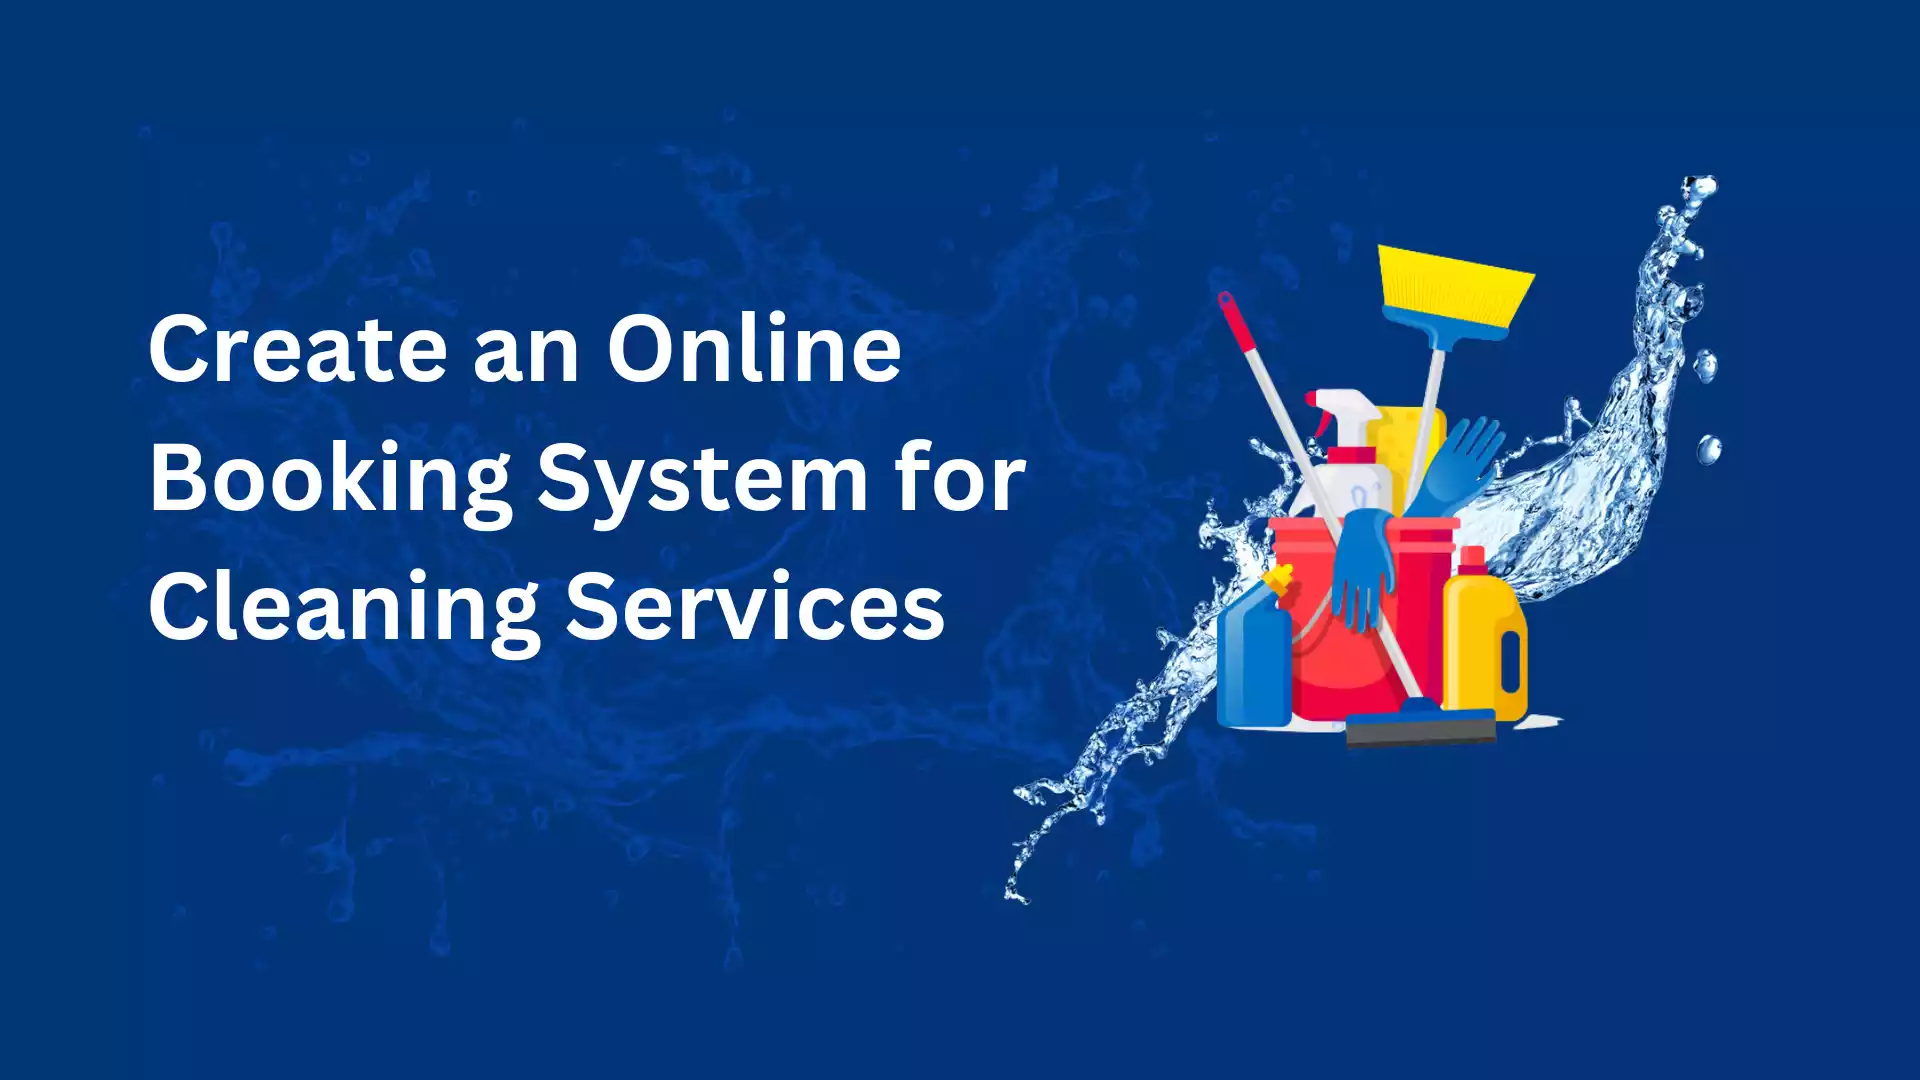 Create an Online Booking System for Cleaning Services